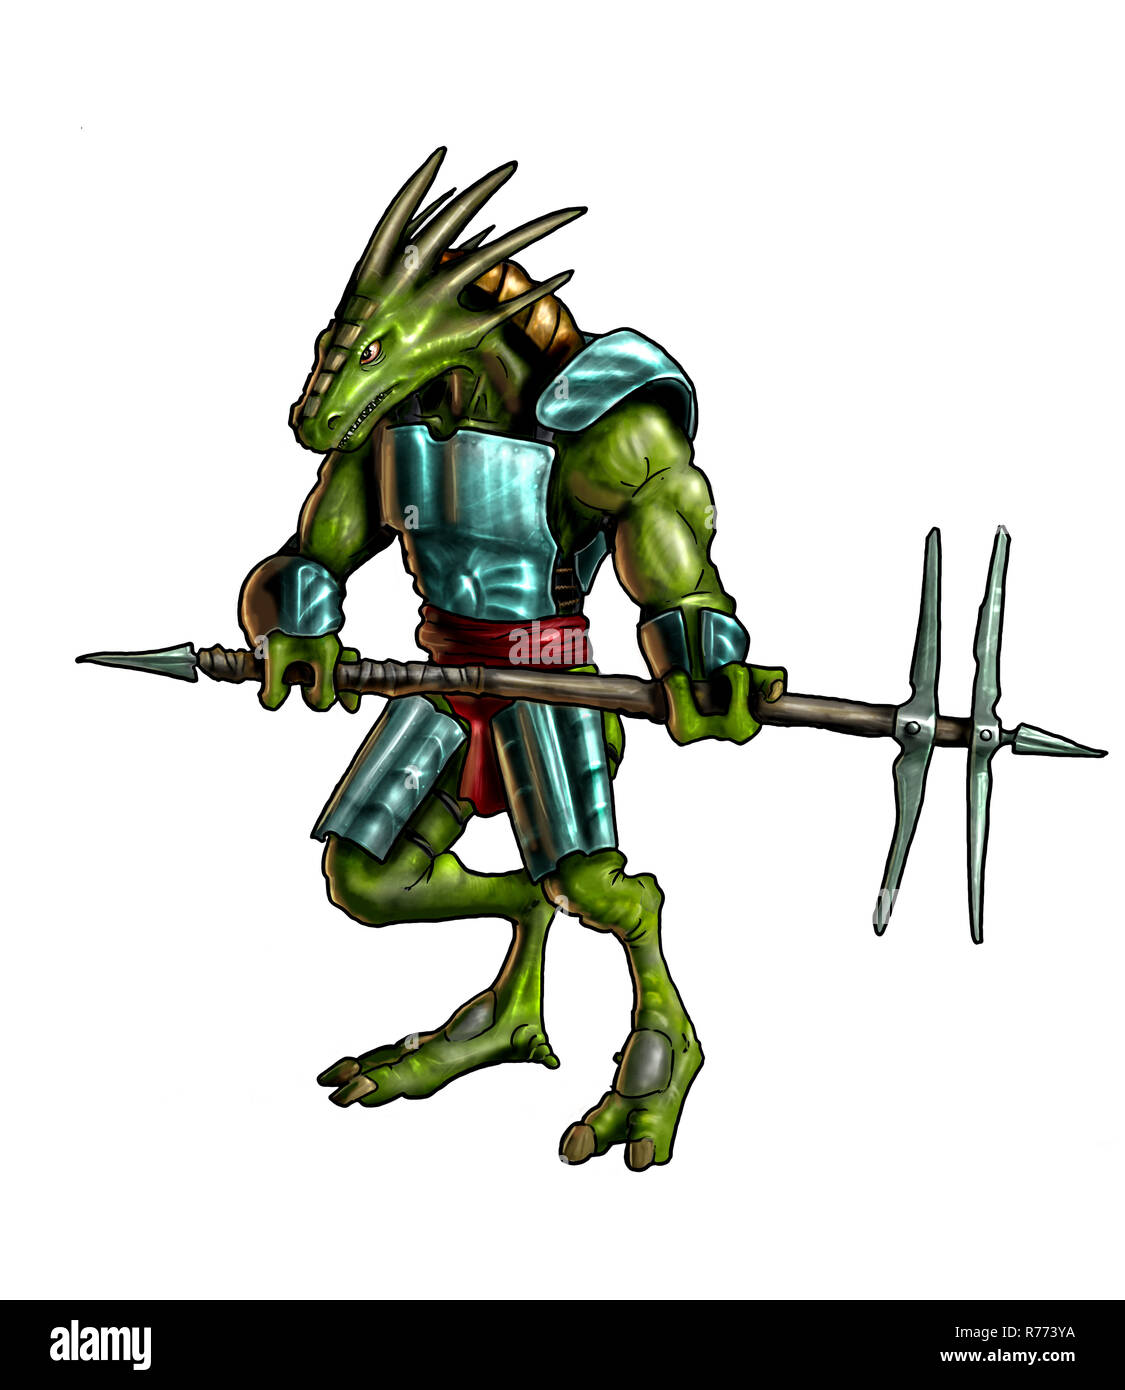 Concept Art Fantasy Painting of Lizard Warrior in Armor Stock Photo